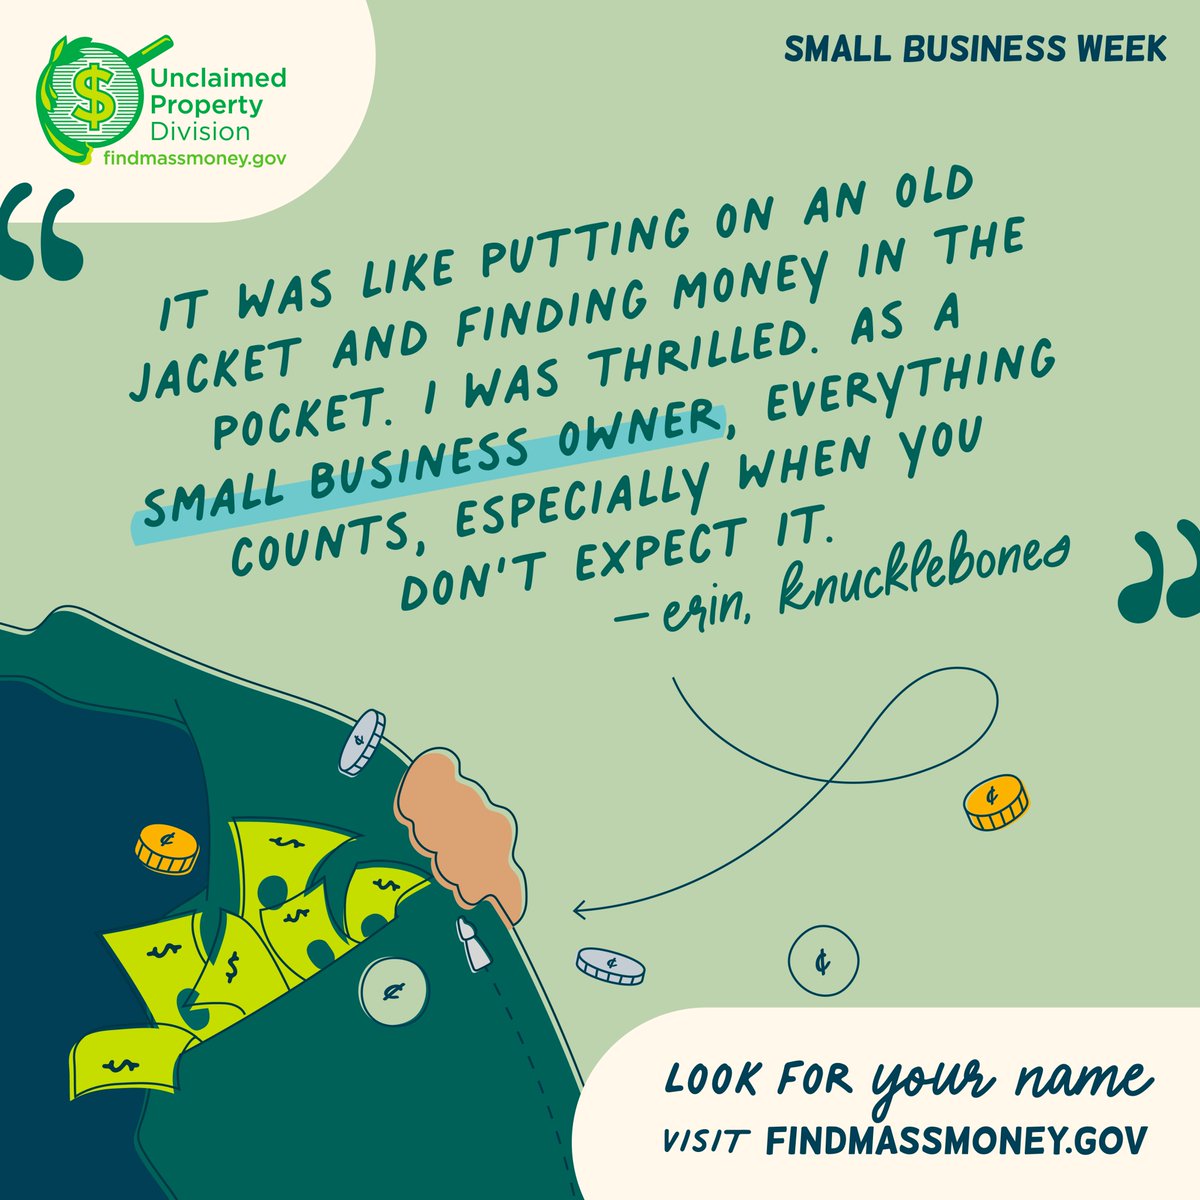 It's #SmallBusinessWeek . Did you know businesses can have unclaimed property too? It's not just individuals! If you own a small business, check findmassmoney.gov to see if you have money waiting for you.